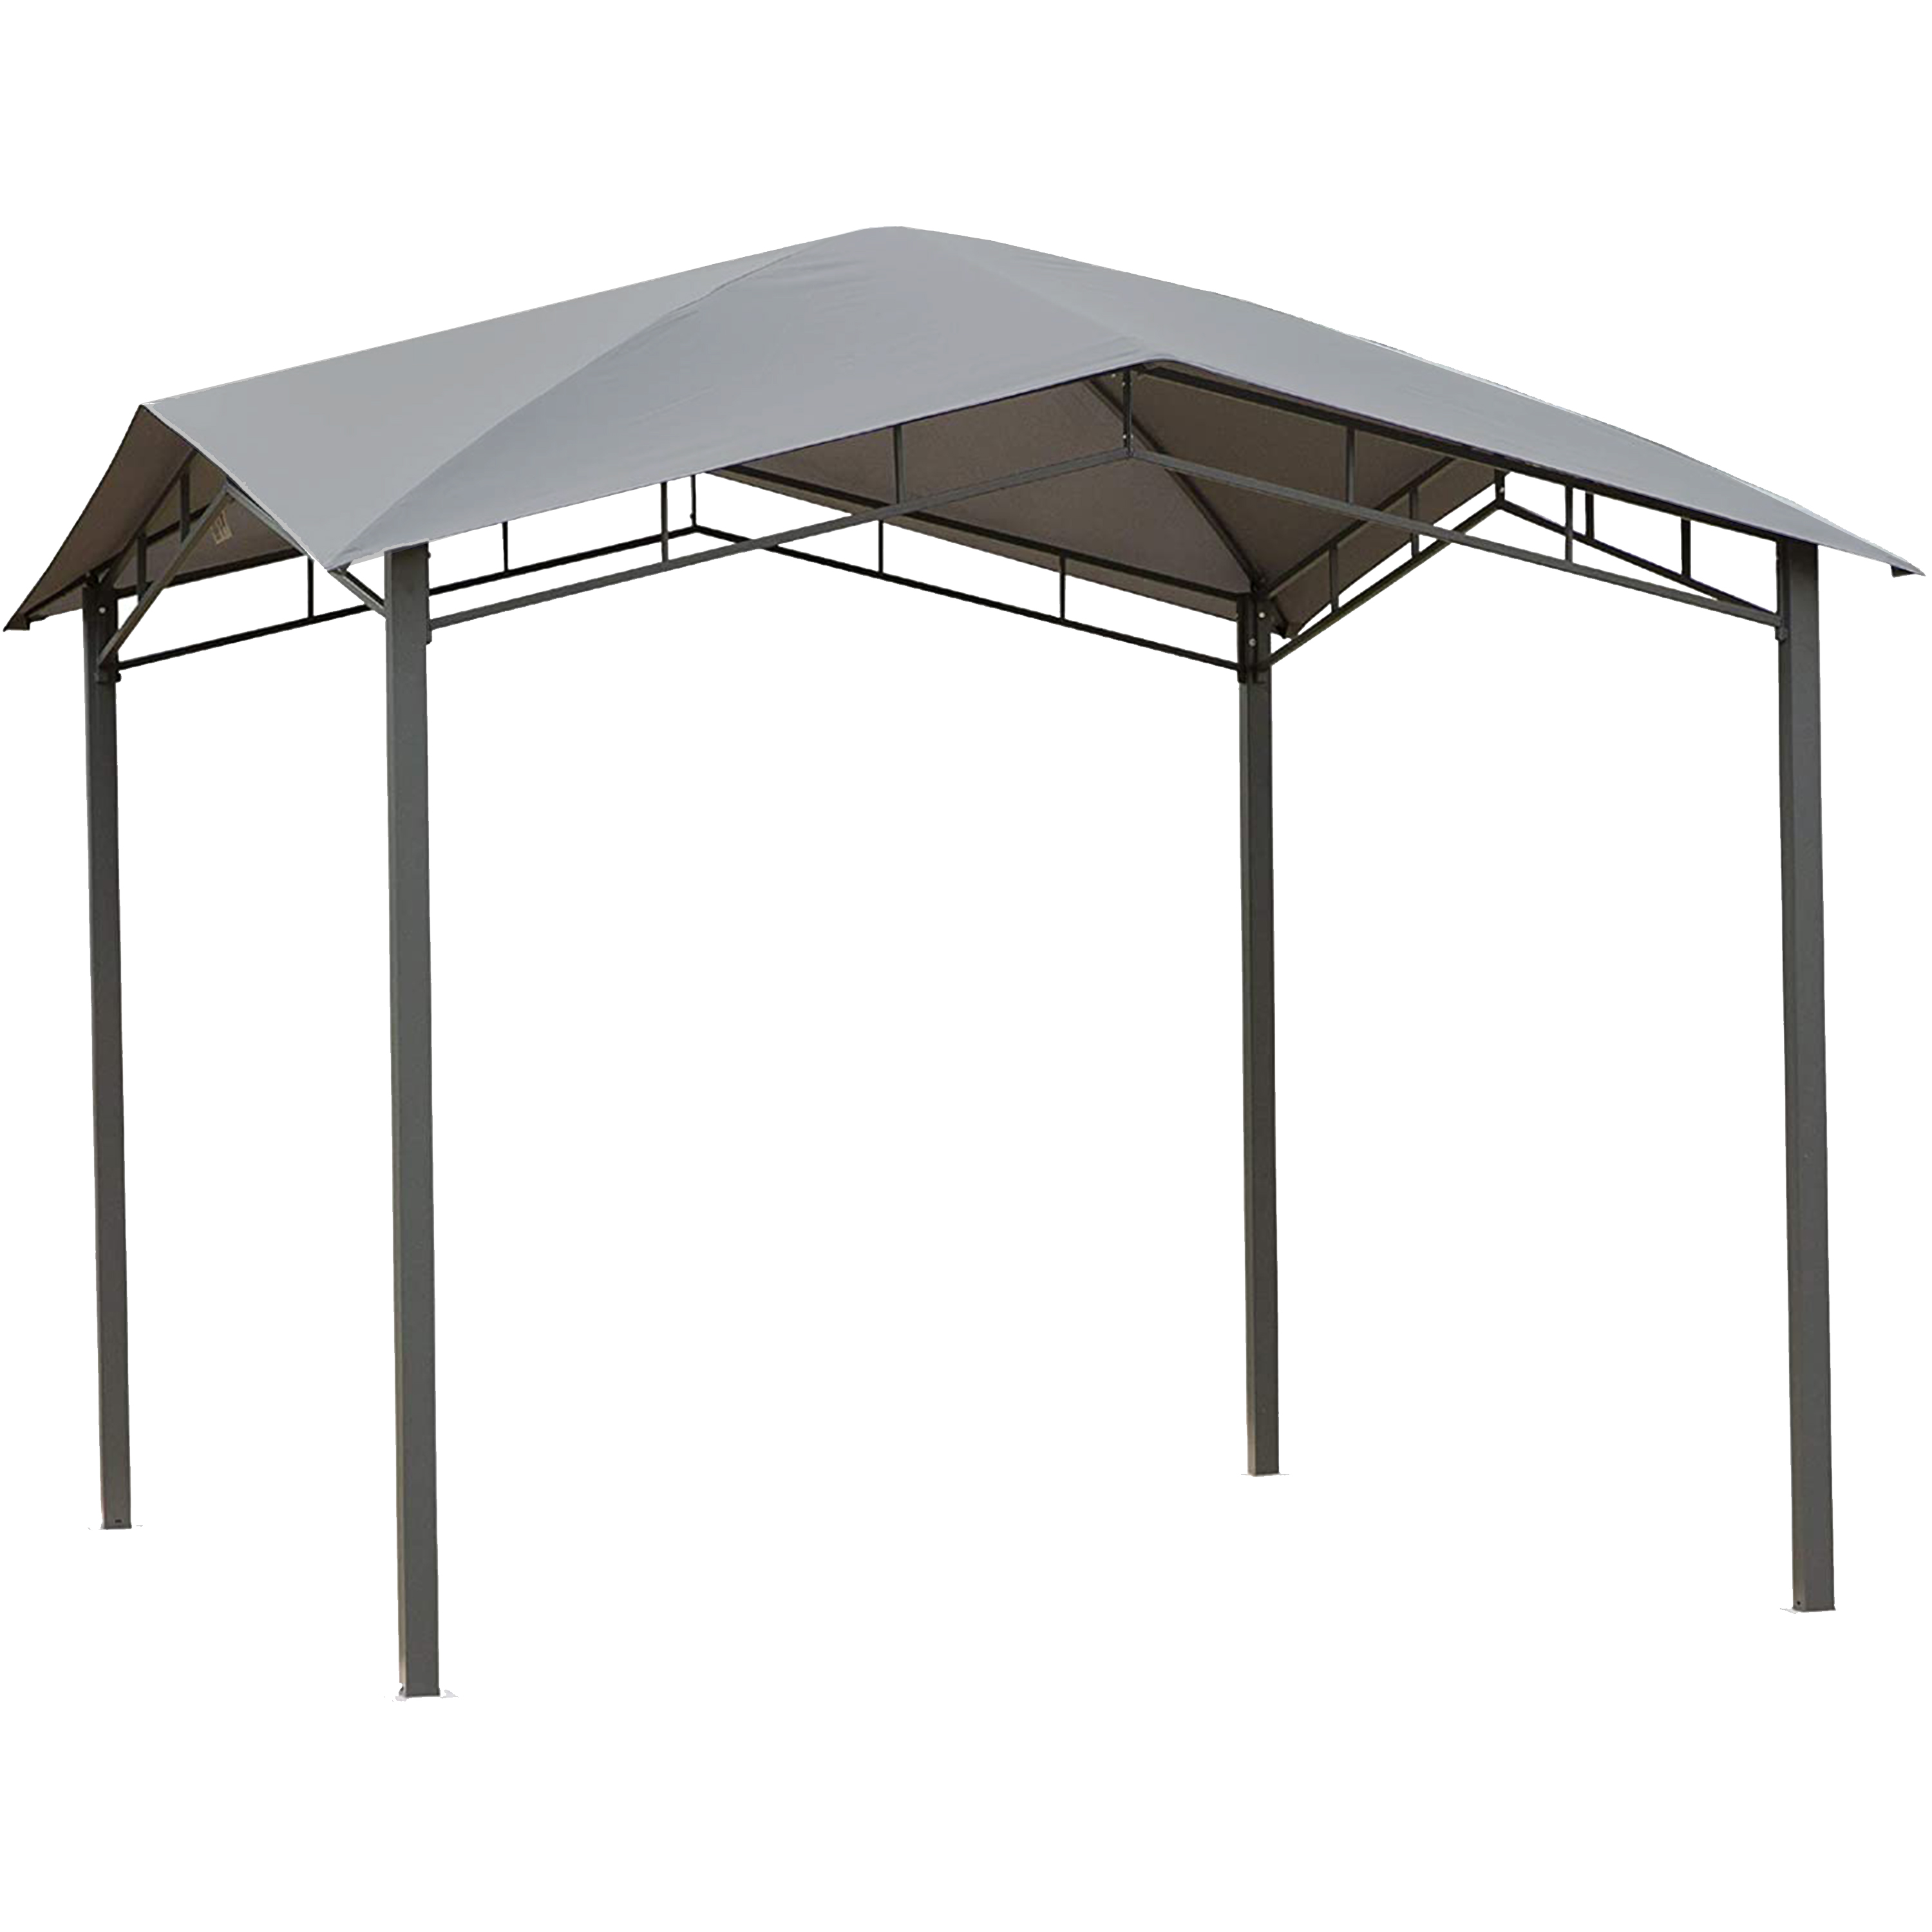 Replacement Canopy for OTSU1892 Pitched Roof Gazebo - Riplock 35